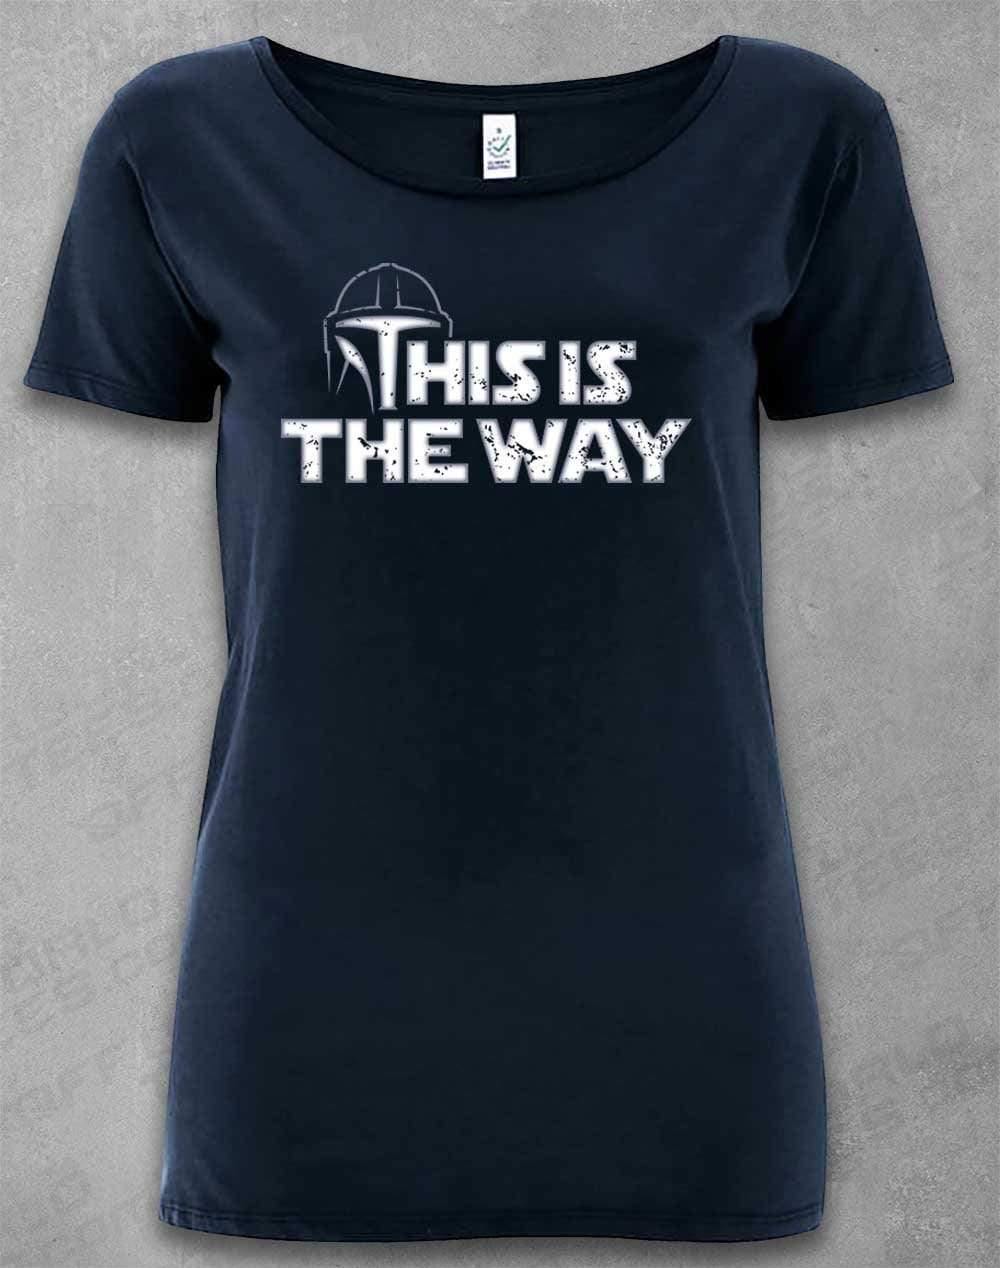 DELUXE This is the Way - Organic Scoop Neck T-Shirt 8-10 / Navy  - Off World Tees